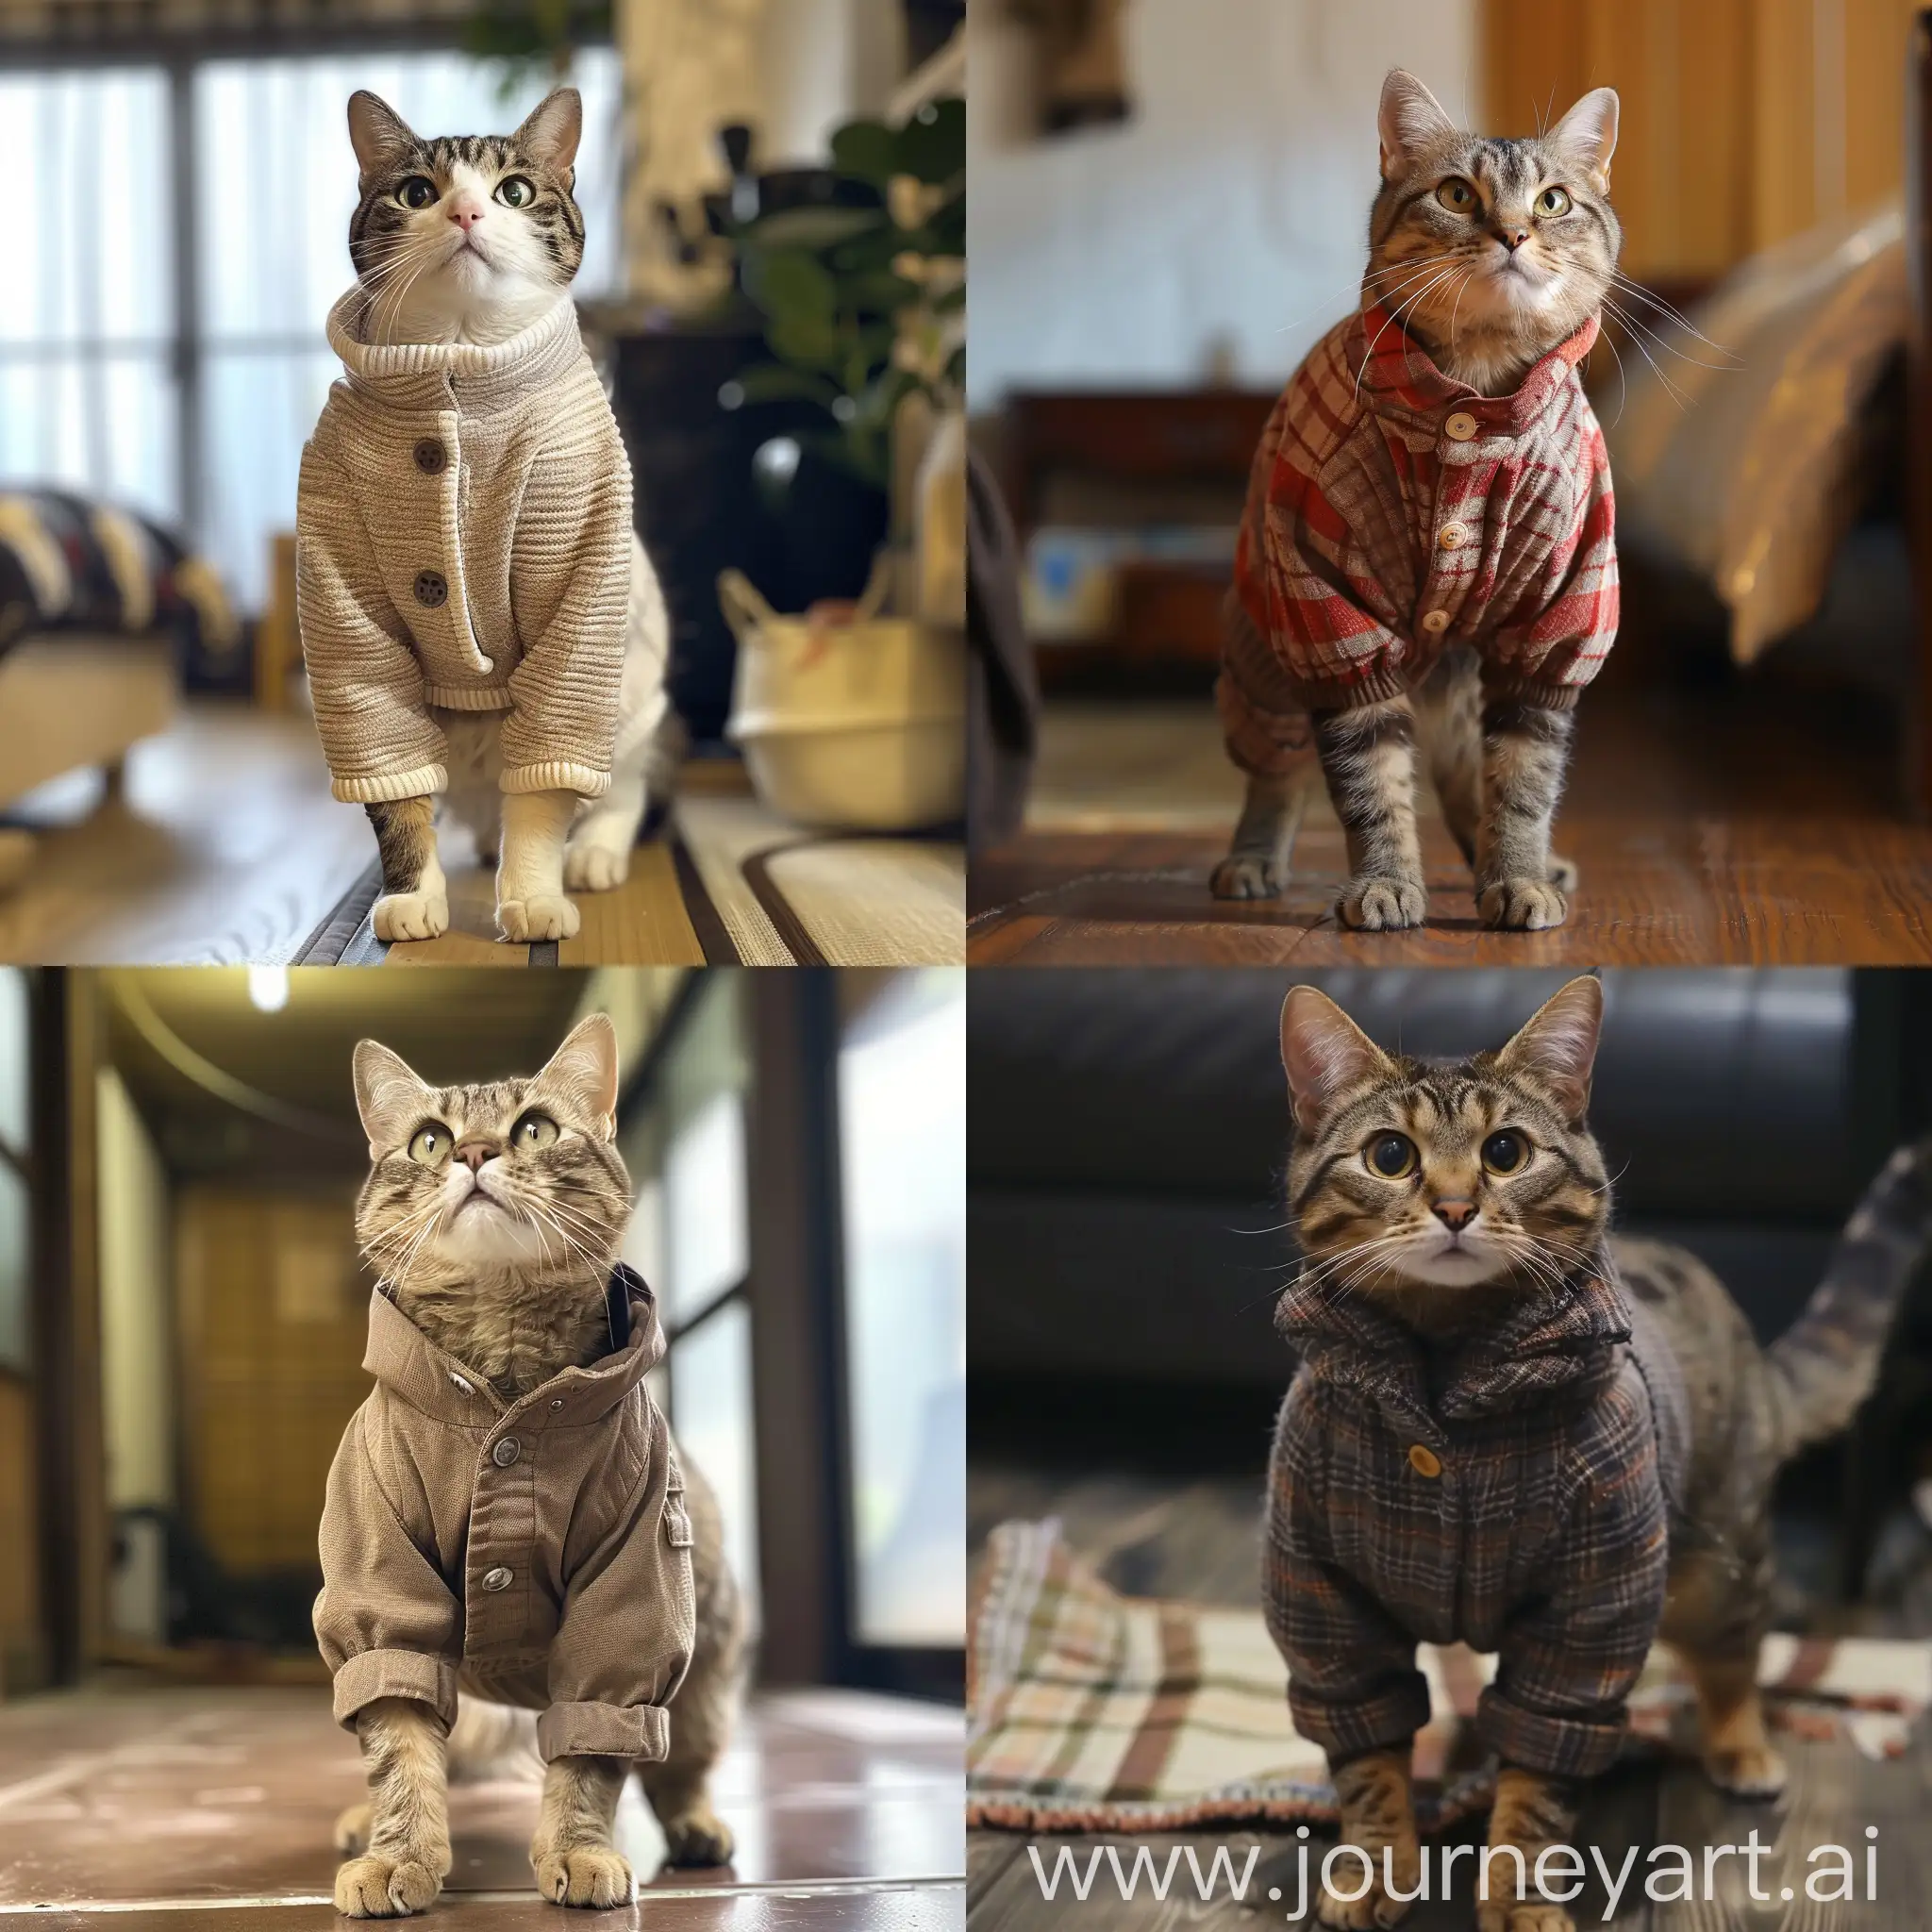 Fashionable-Cat-Standing-Upright-in-Clothing